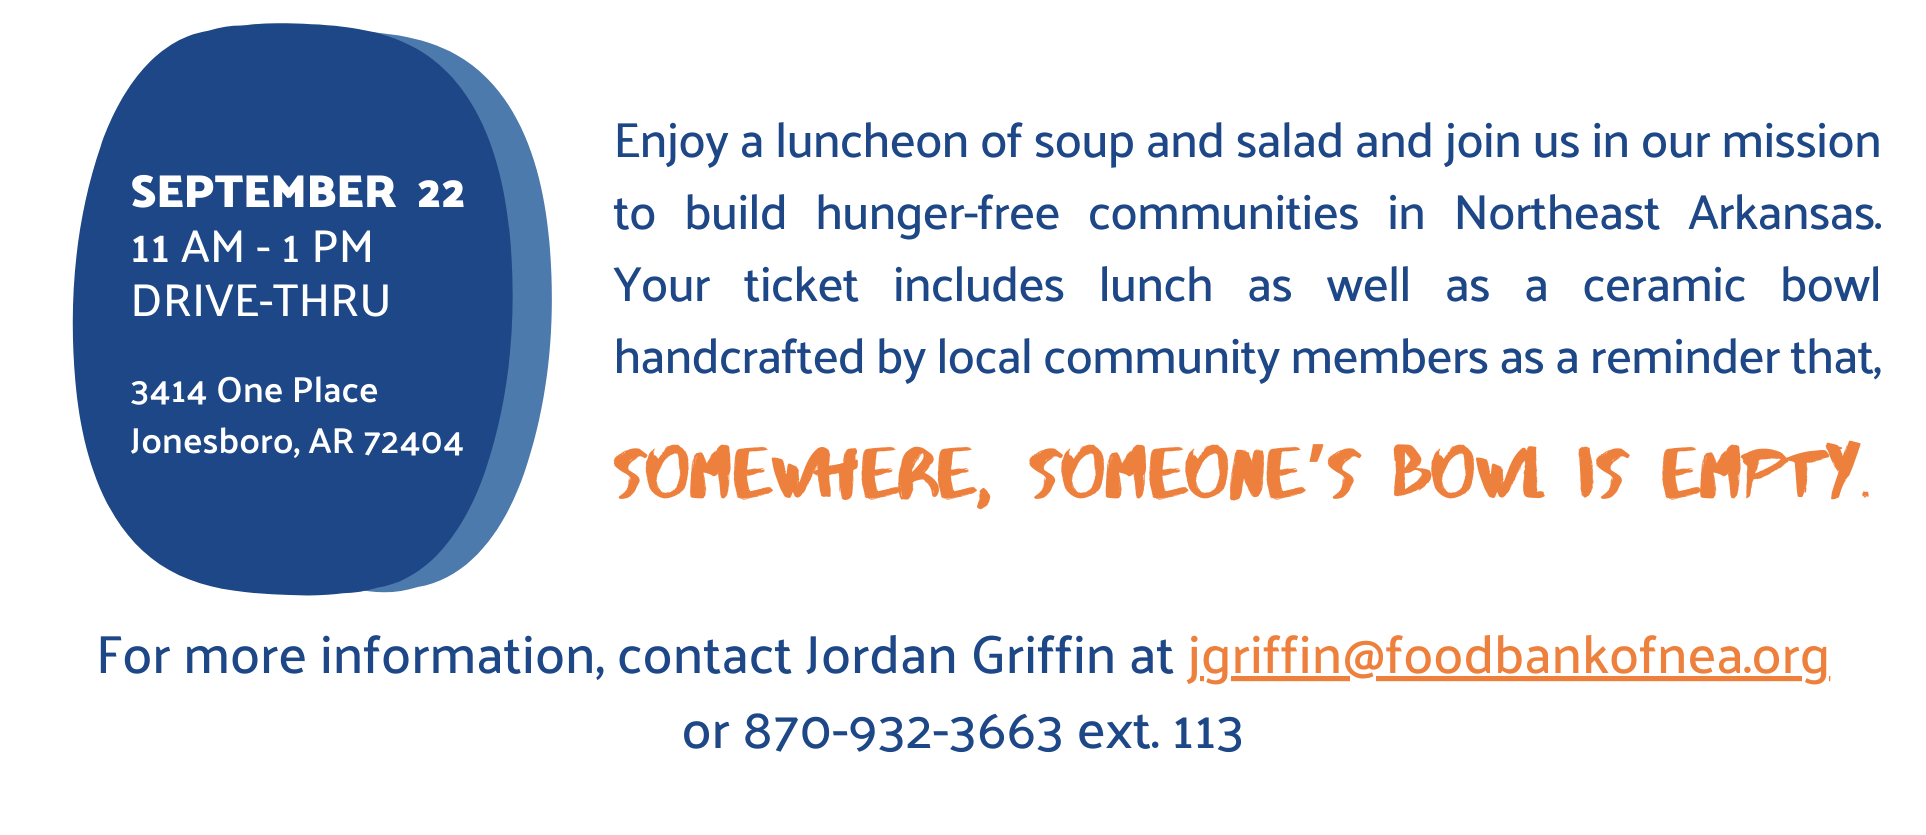 Enjoy a luncheon of soup and salad and join us in our mission to build hunger-free communities in Northeast Arkansas. Your ticket includes lunch as well as a ceramic bowl handcrafted by local community members as a reminder that, somewhere, someone’s bowl is empty. For more information, contact Jordan Griffin at jgriffin@foodbankofnea.org or 870-932-3663 ext. 113